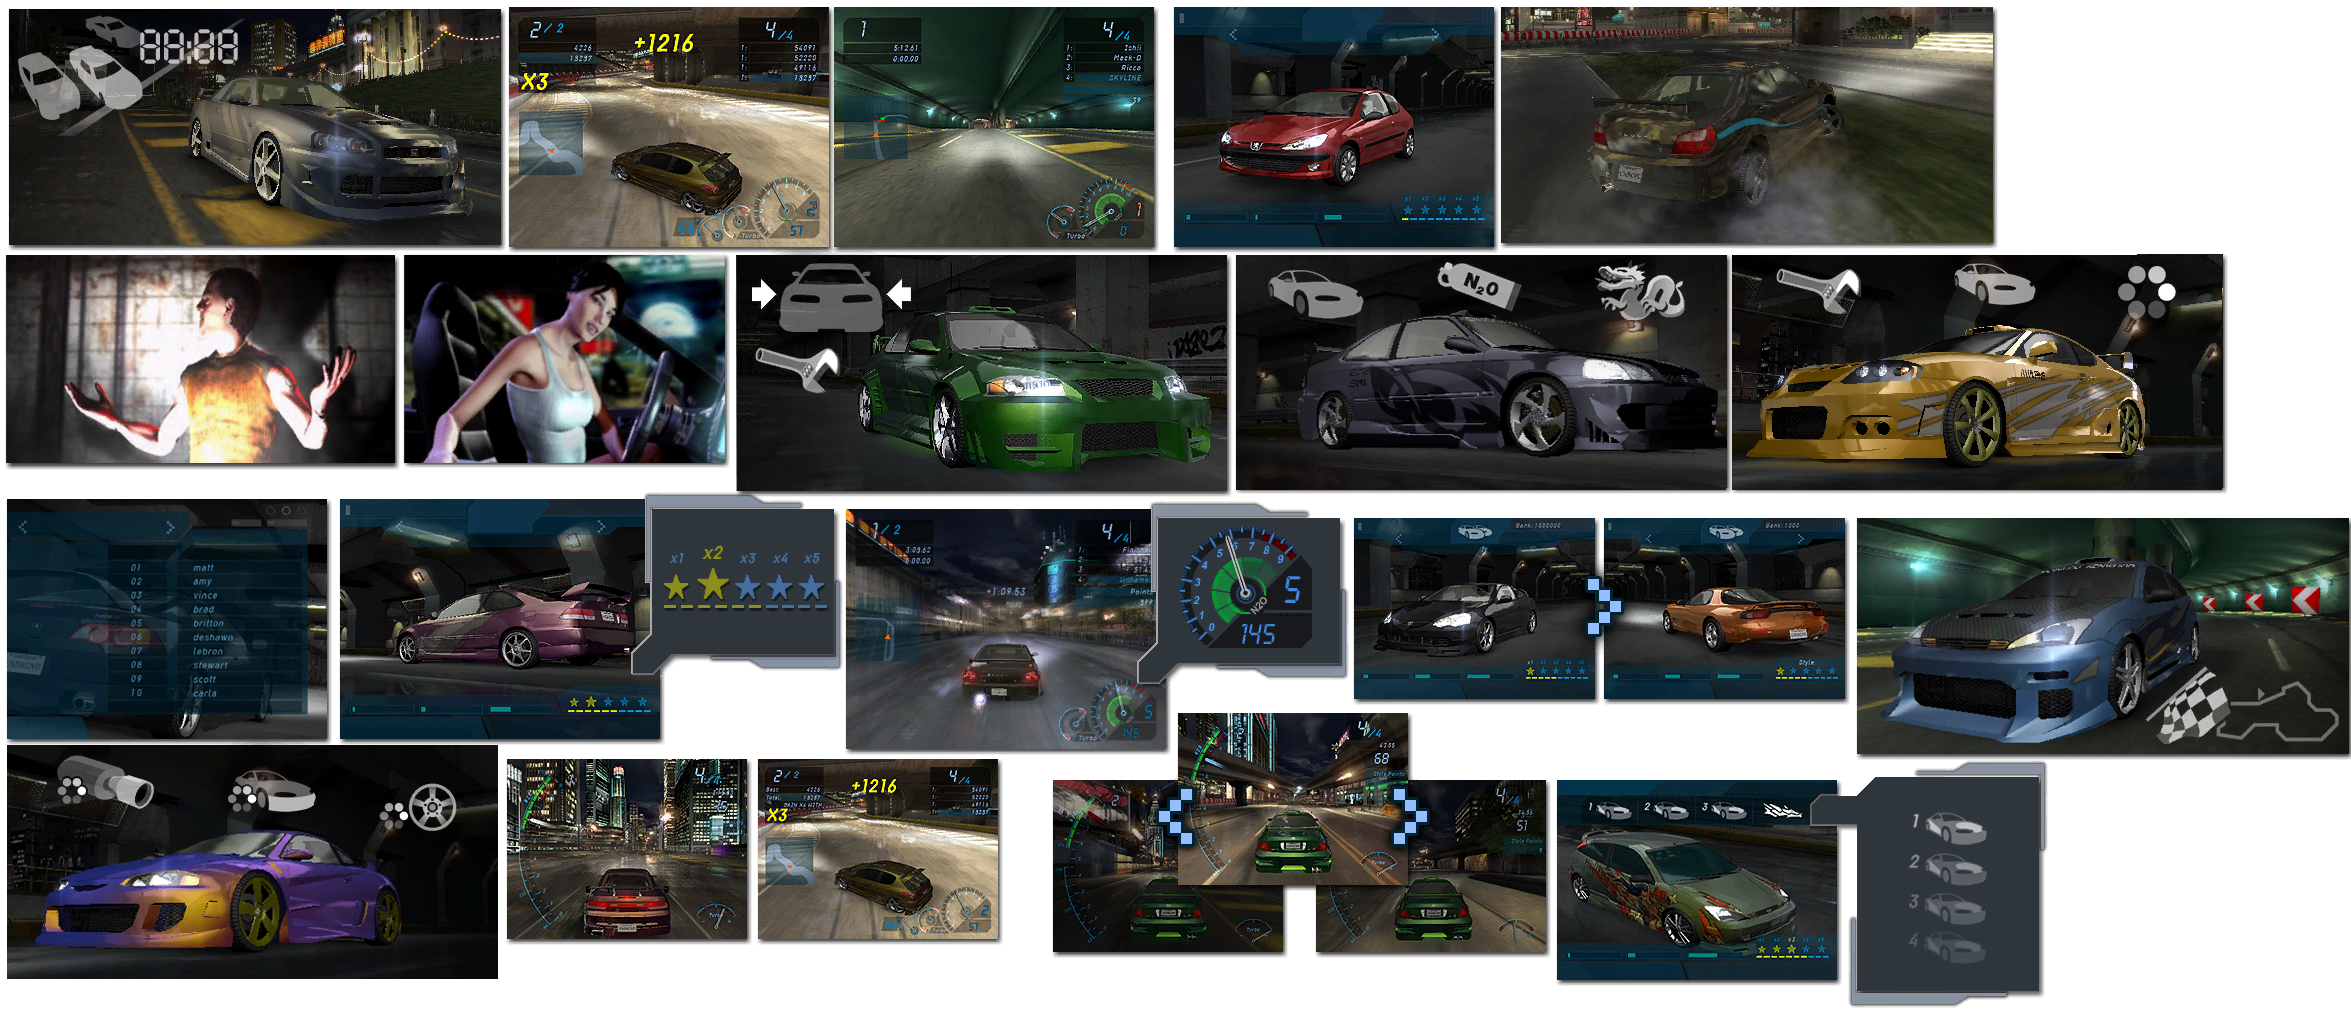 Need for Speed: Underground - Loading Images